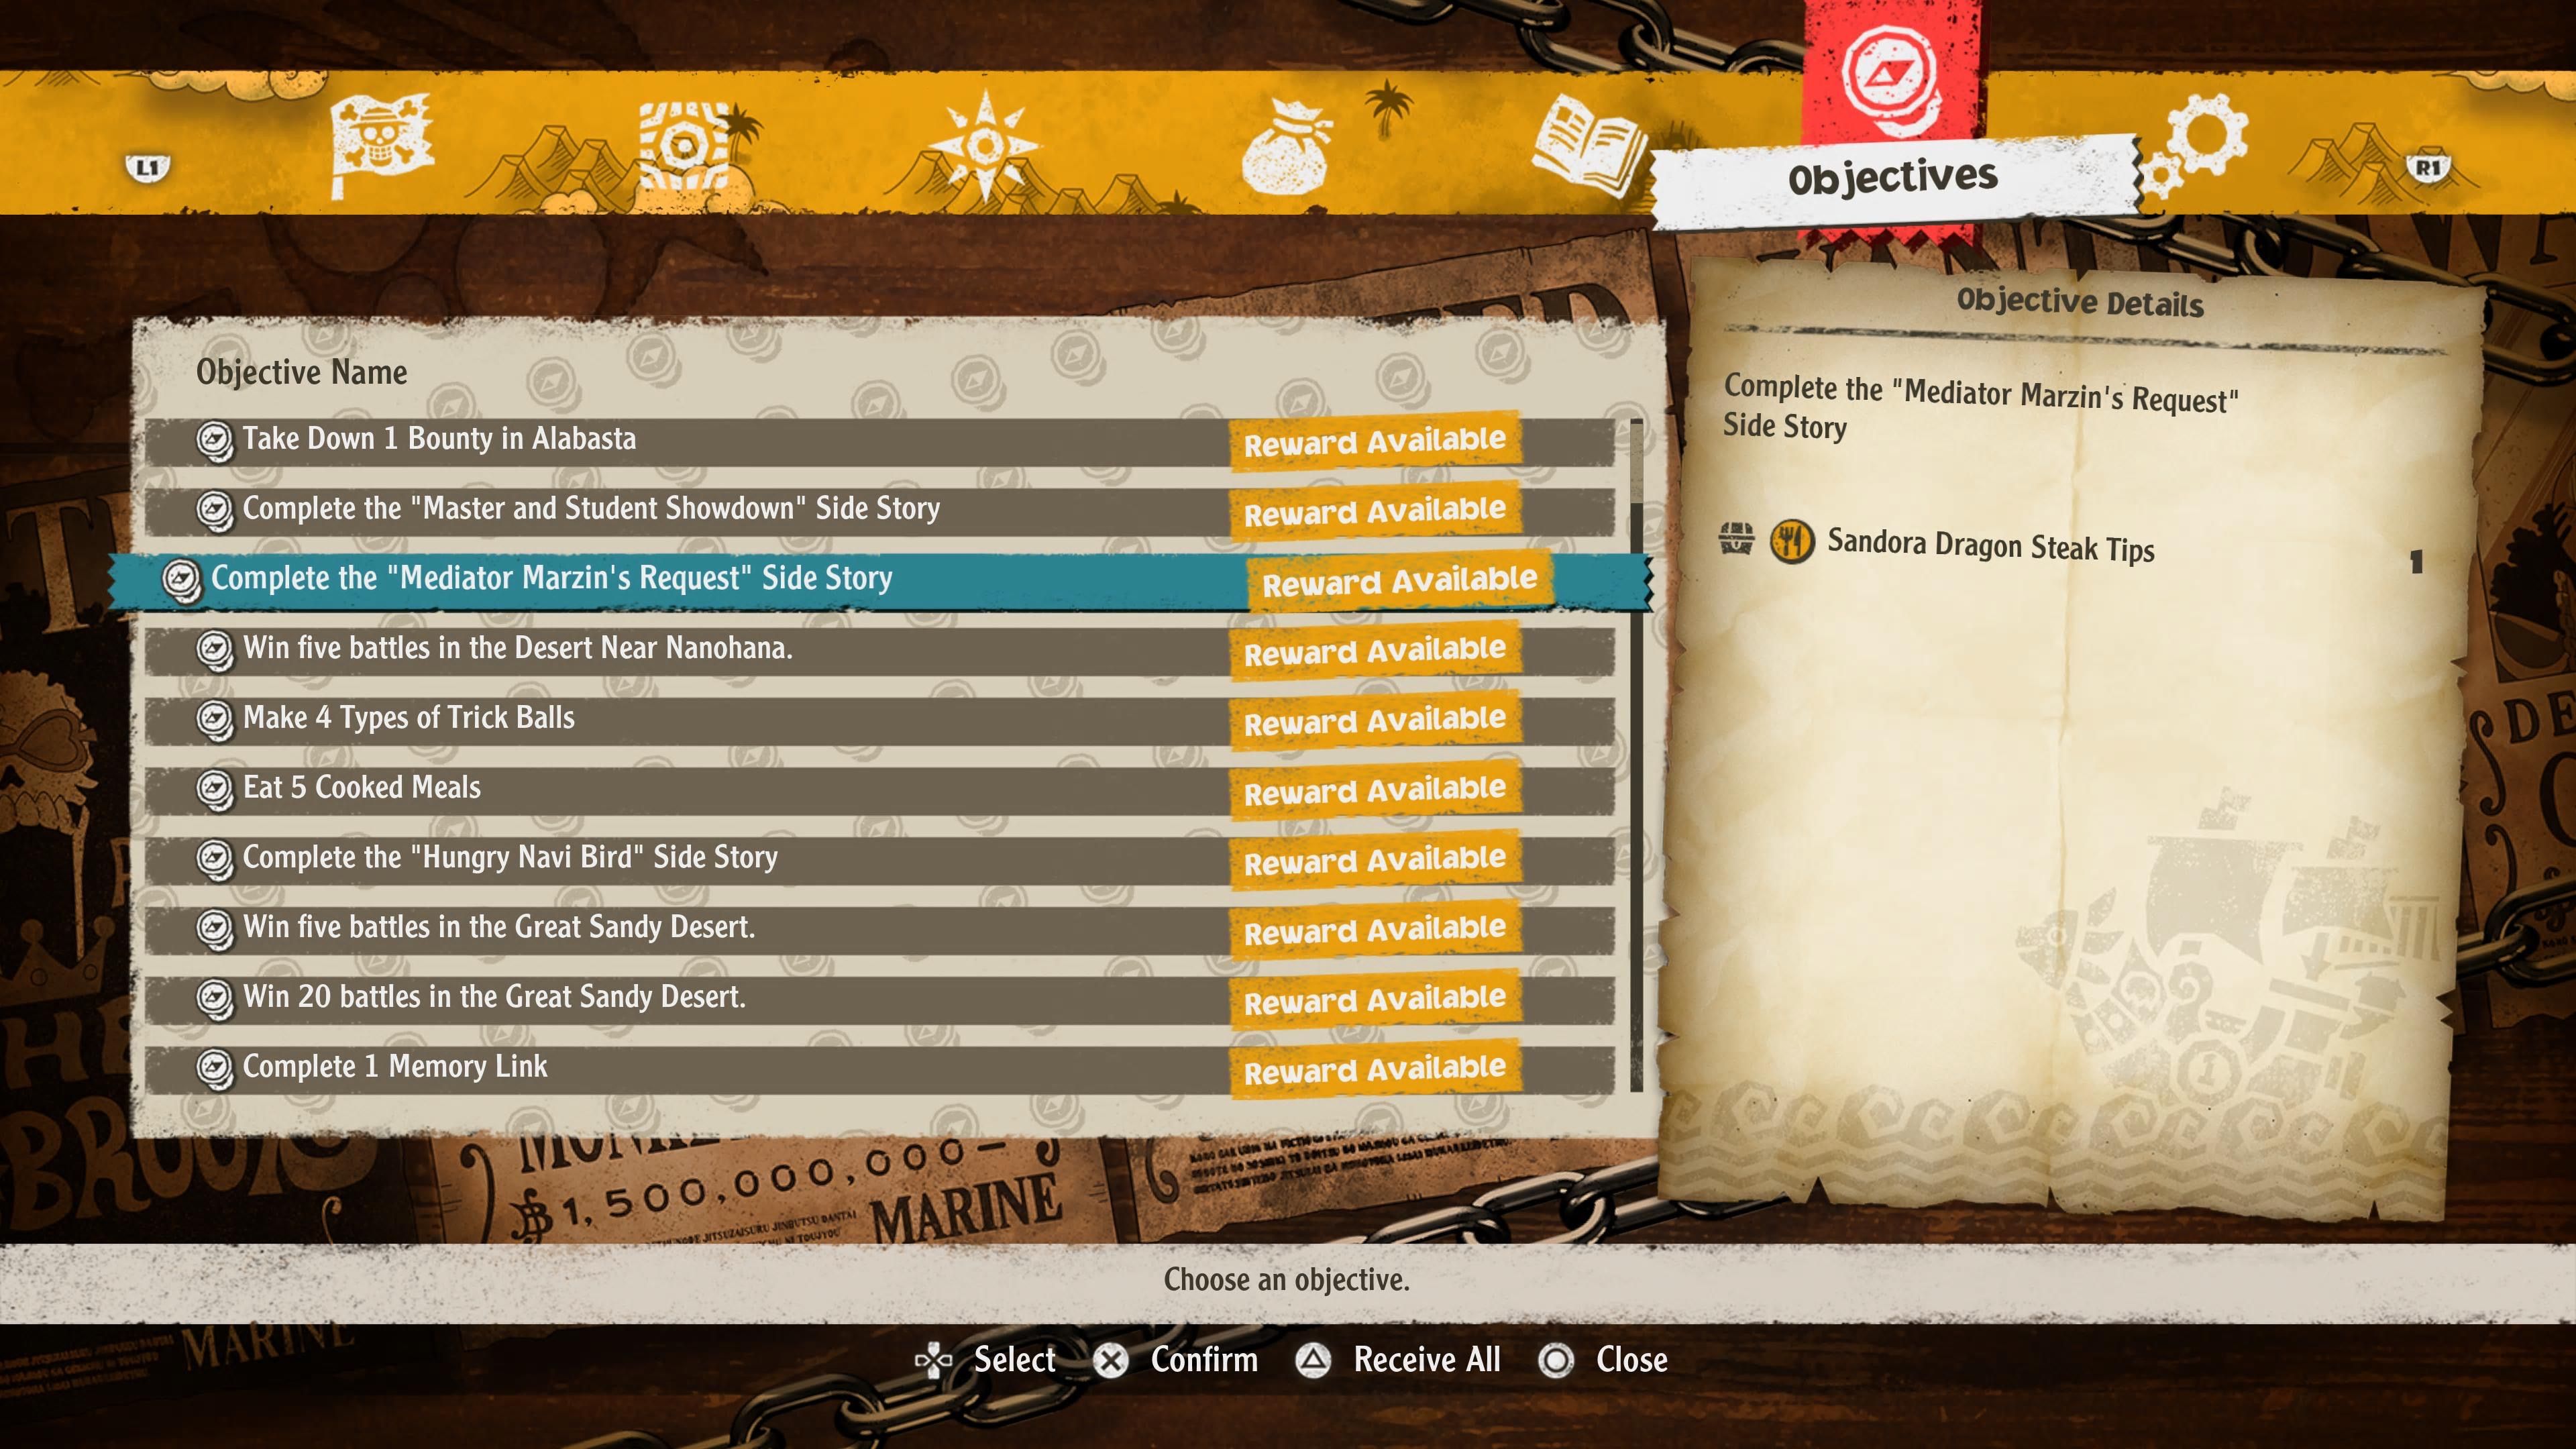 List of objectives in One Piece menu